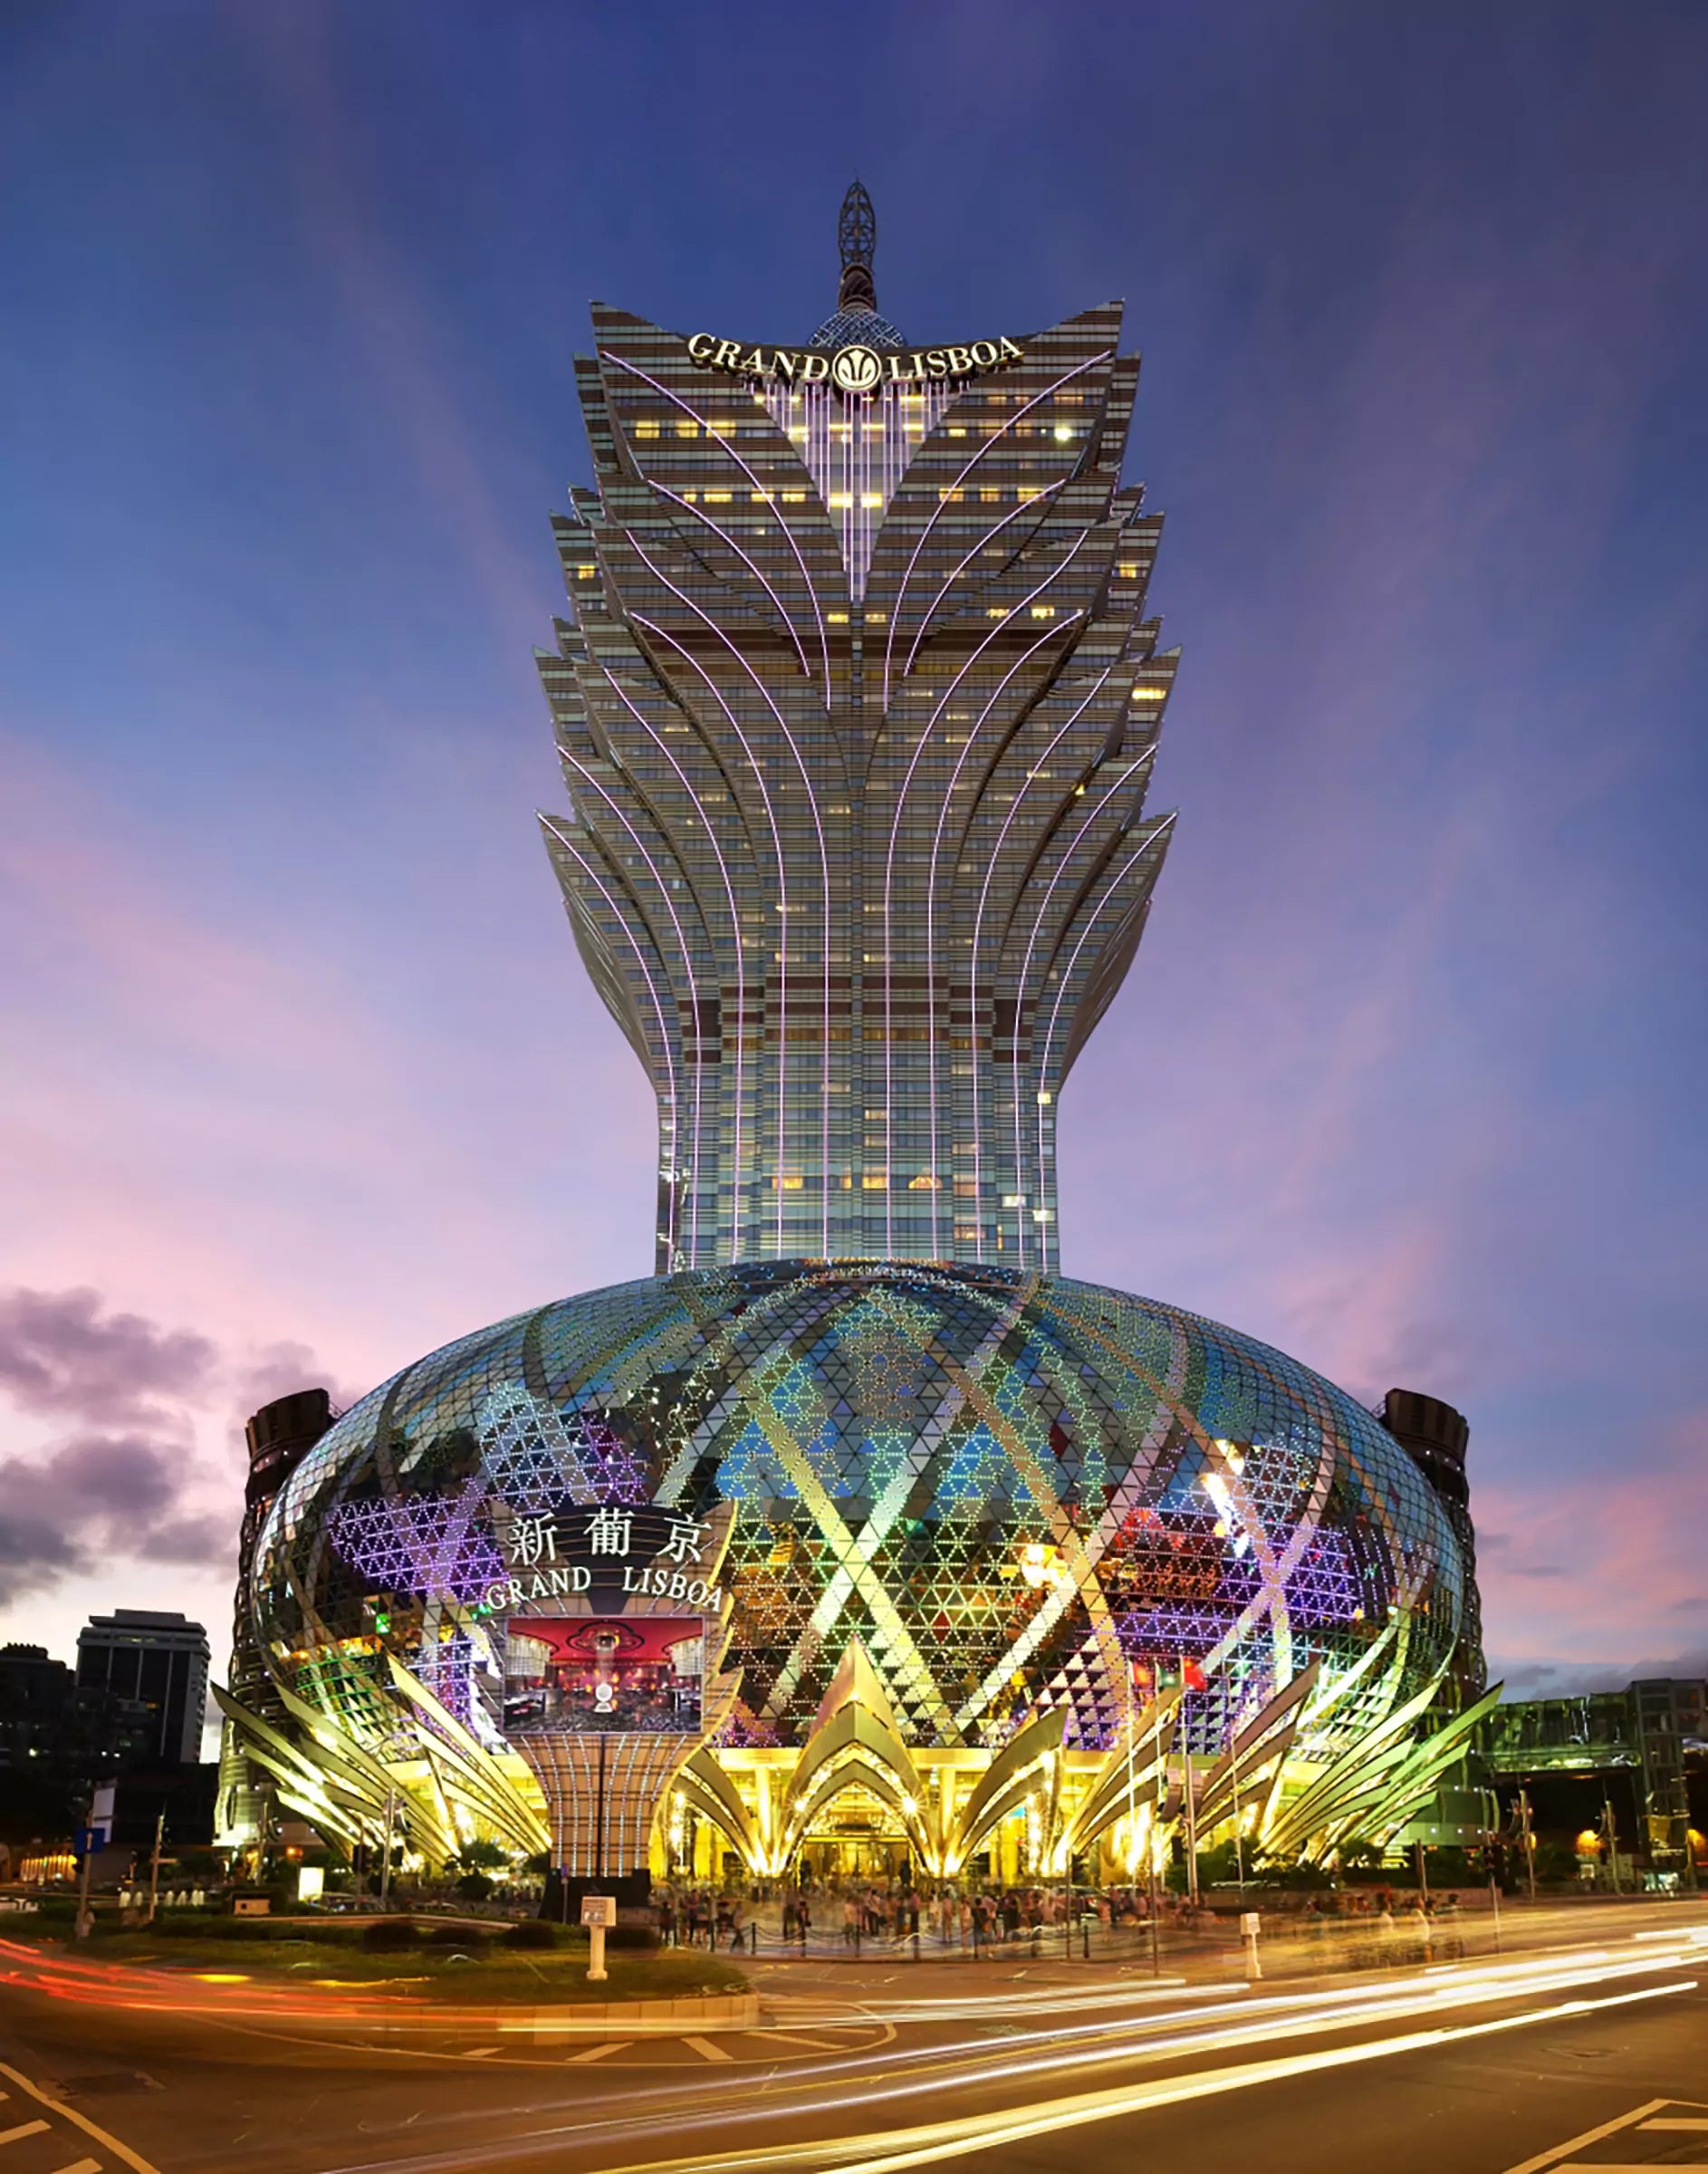 An exterior view at dusk of the Grand Lisboa Hotel and Casino